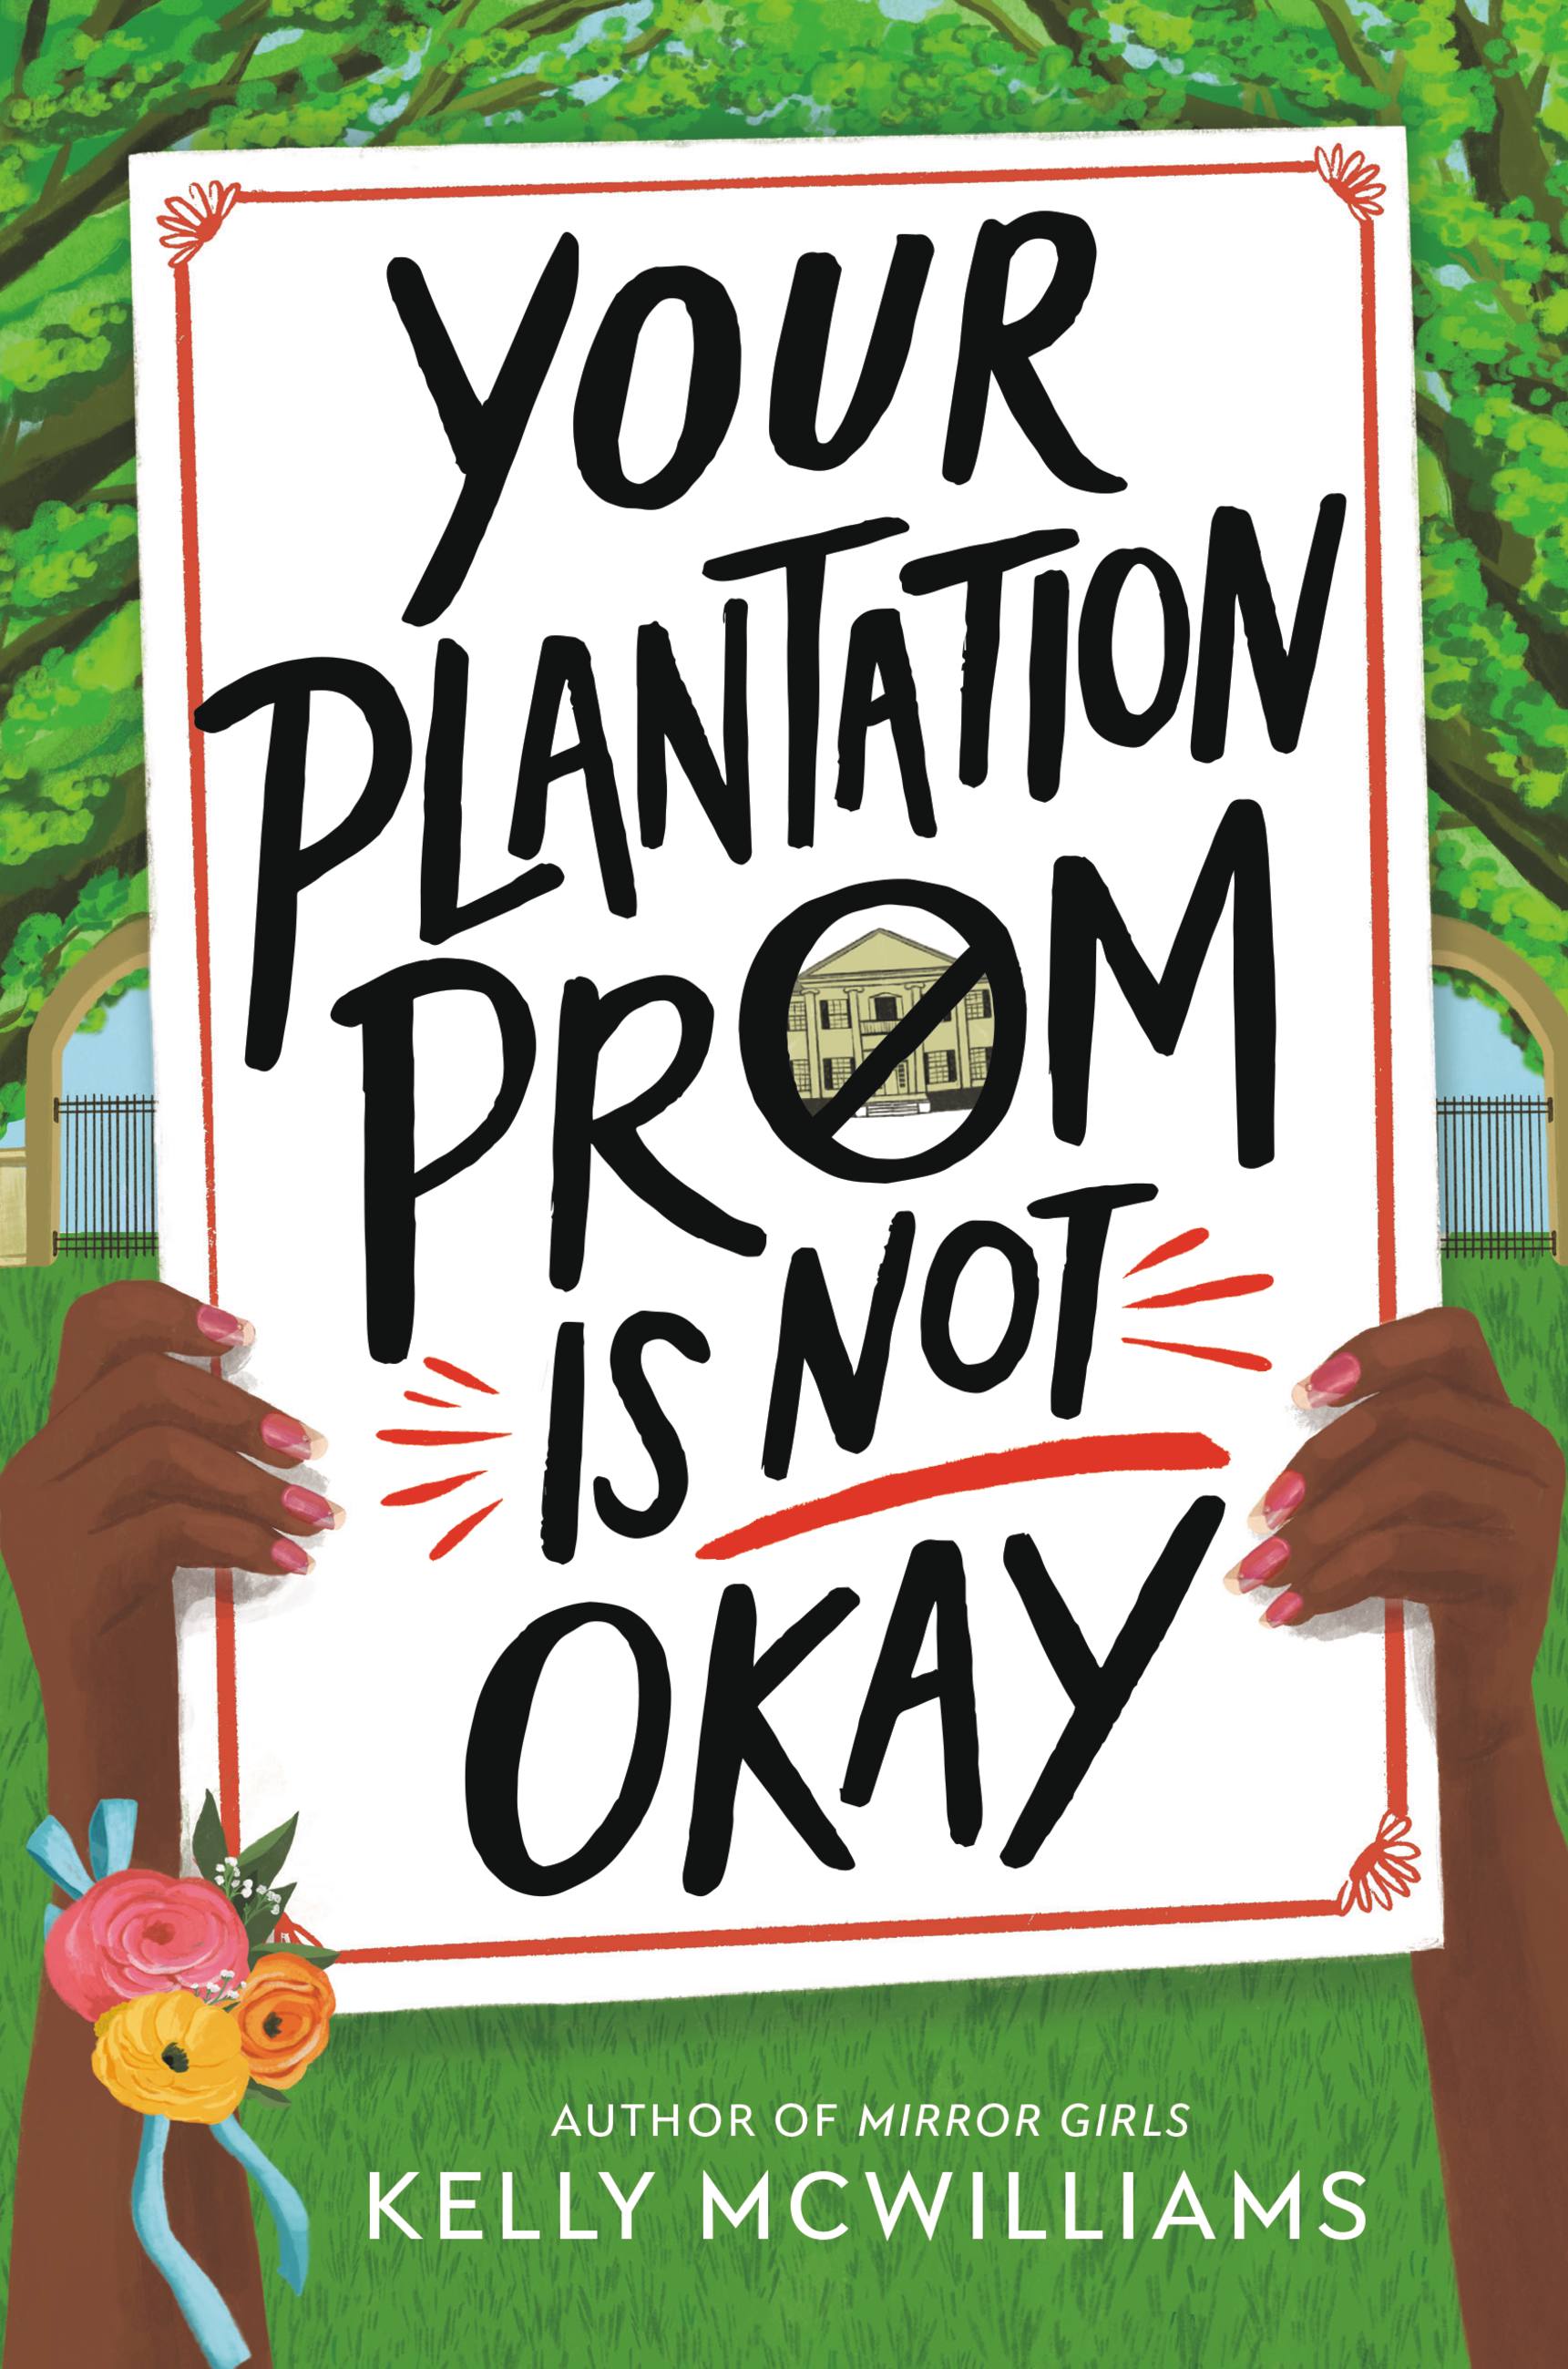 Your Plantation Prom Is Not Okay by Kelly McWilliams Hachette Book Group